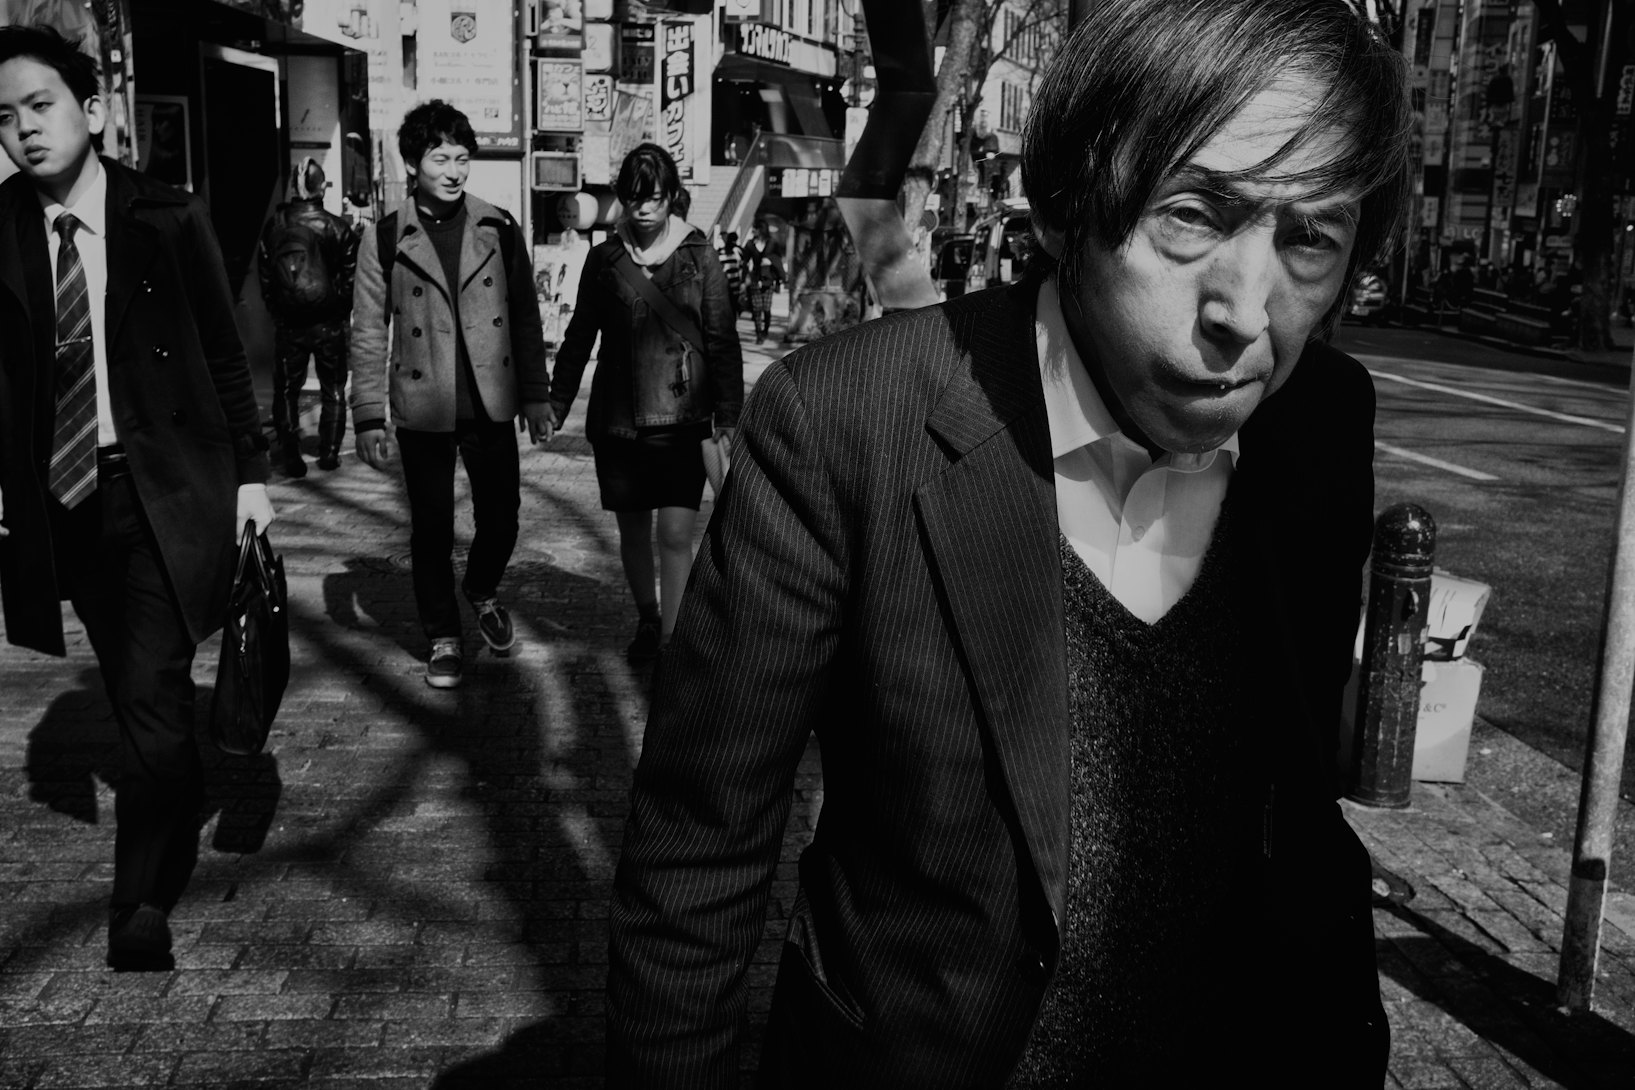 Tokyo Photographer - Lukasz Palka — How to Get Better at Street Photography